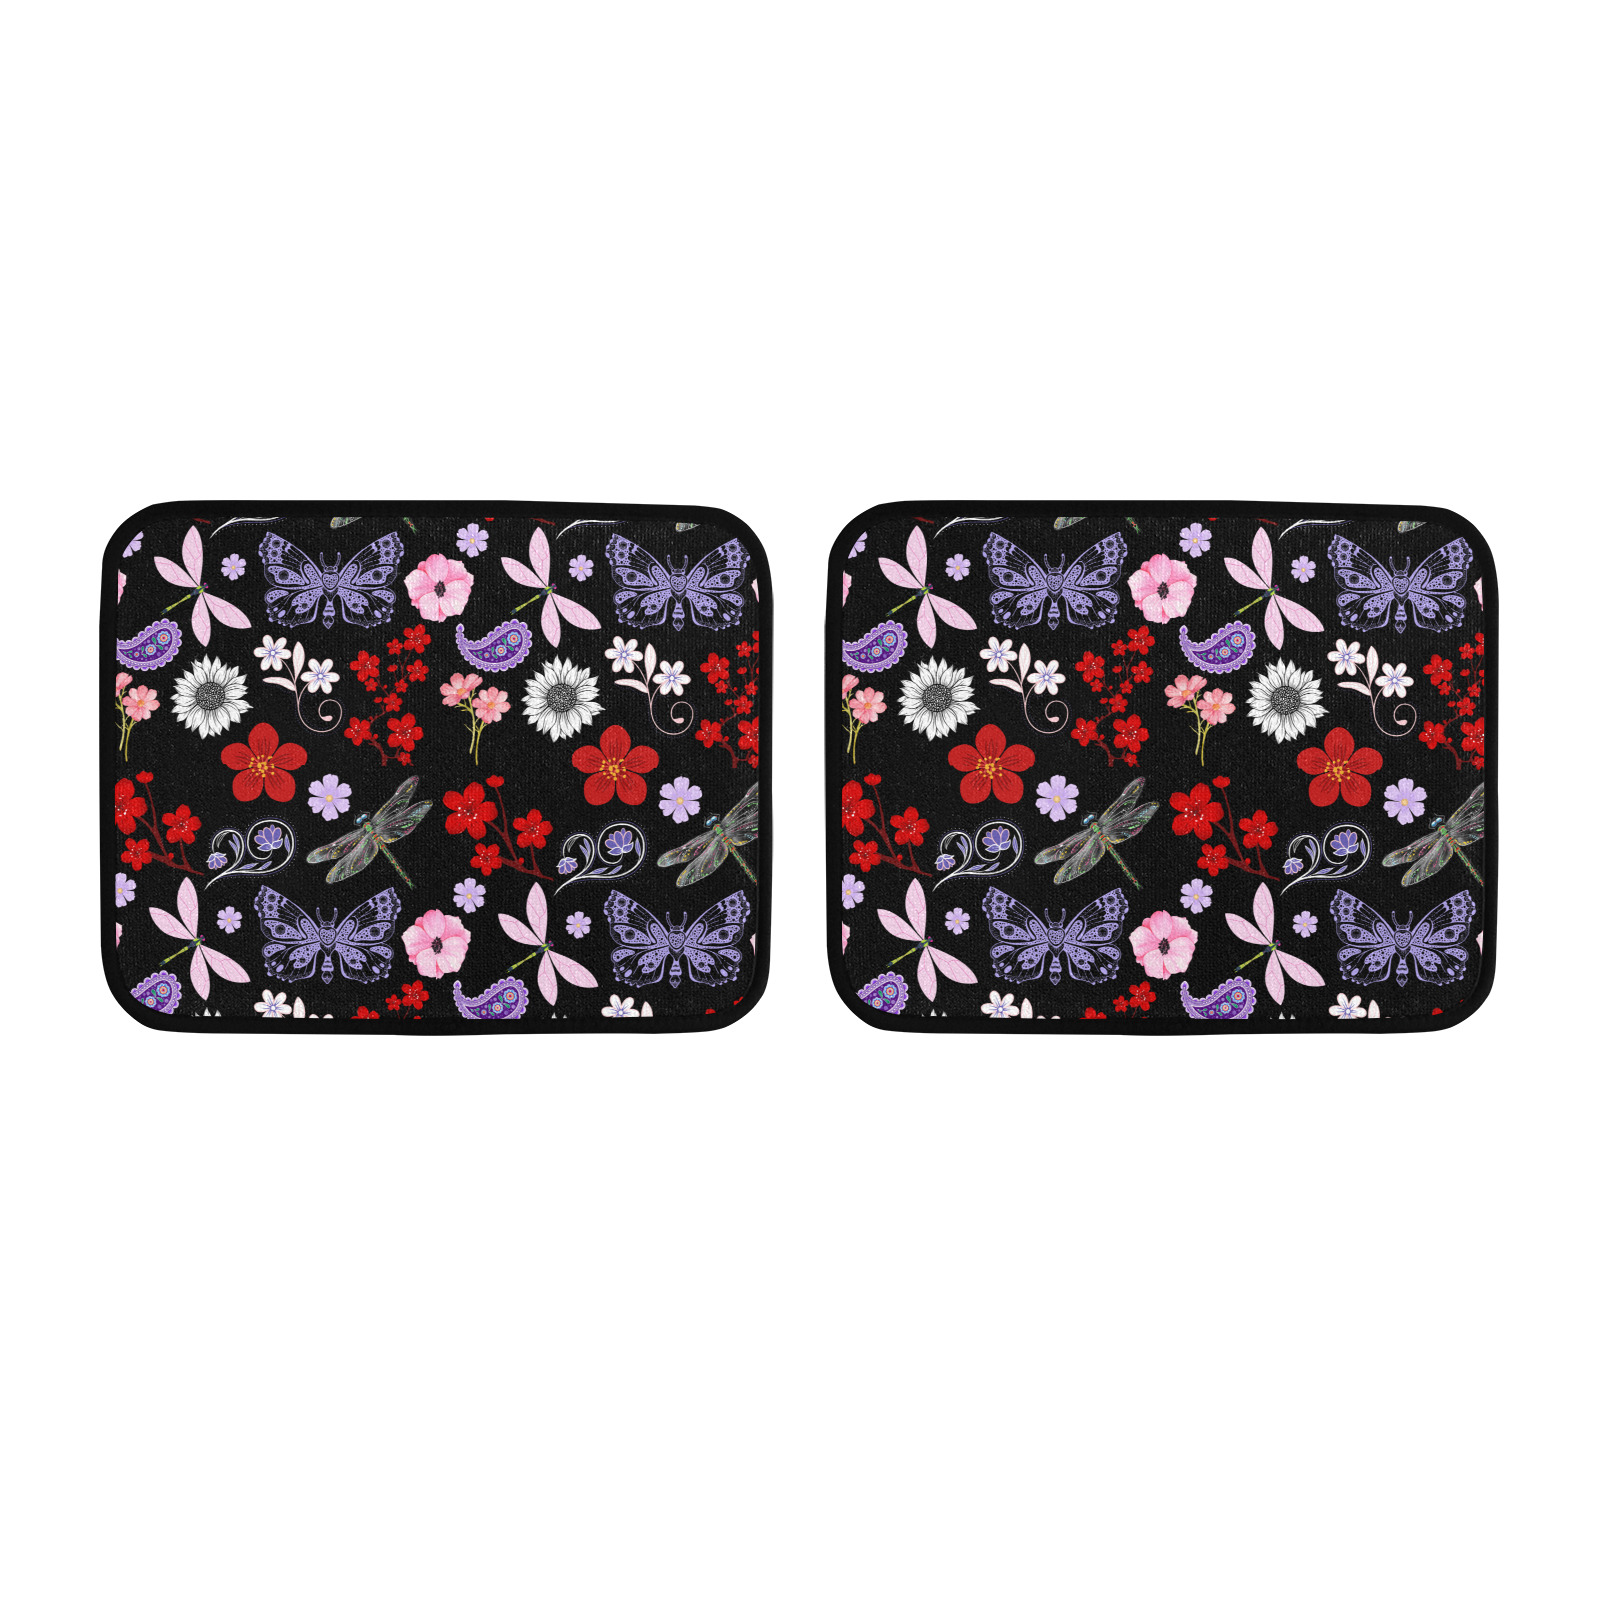 Black, Red, Pink, Purple, Dragonflies, Butterfly and Flowers Design Back Car Floor Mat (2pcs)